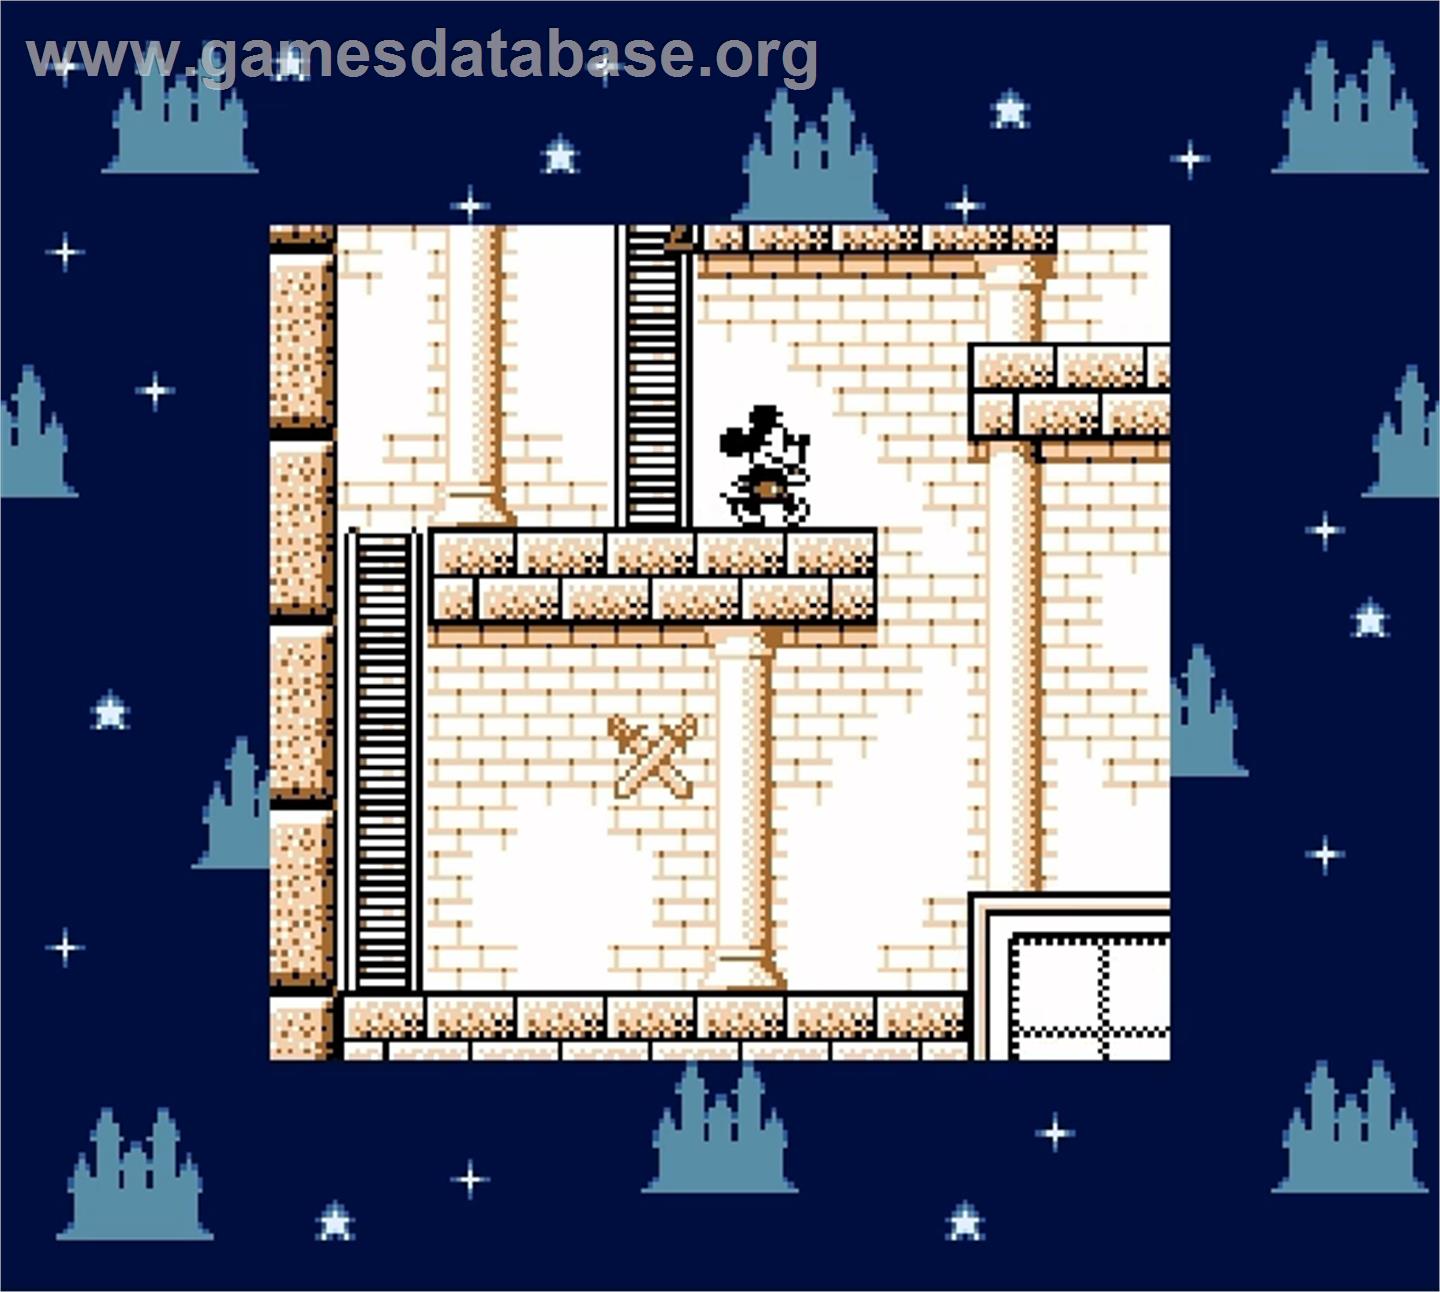 Mickey Mouse - Magic Wand - Nintendo Super Gameboy - Artwork - In Game